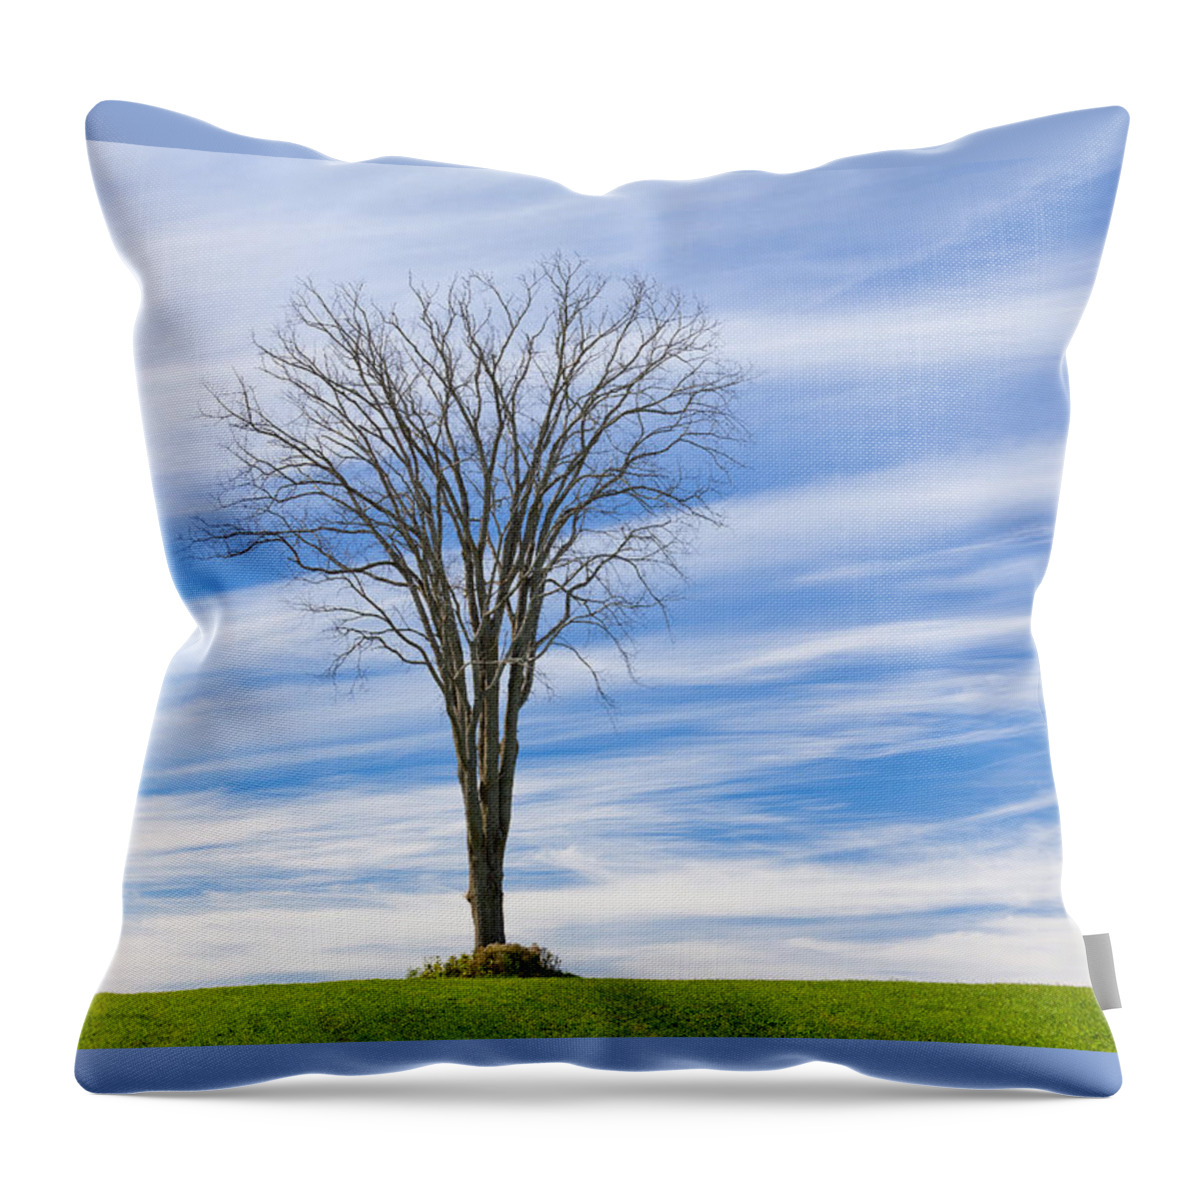 Fall Throw Pillow featuring the photograph November Elm Tree by Alan L Graham